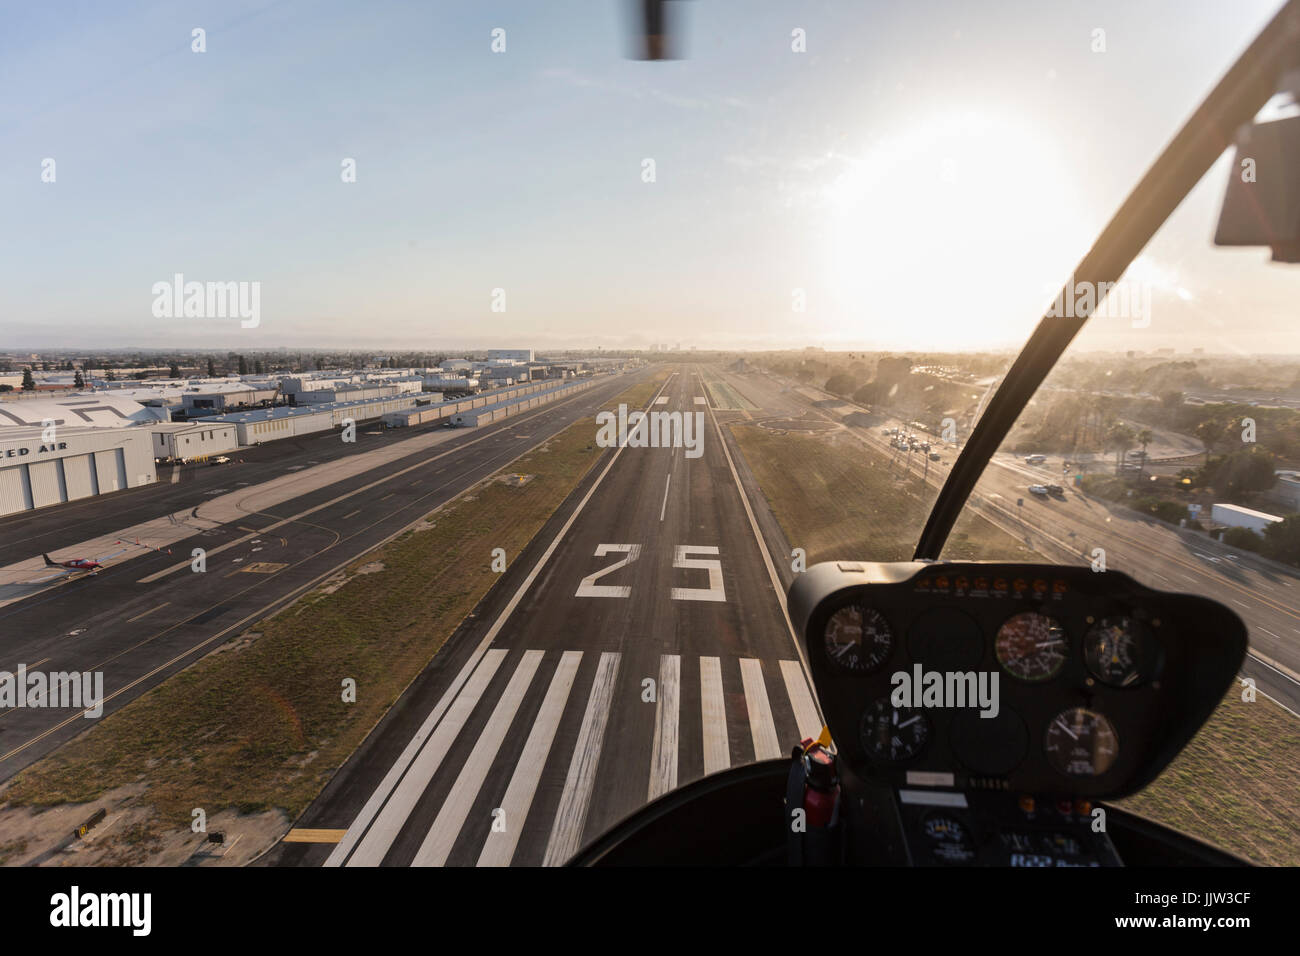 Hawthorne, California, USA - July 10, 2017:  Afternoon view inside helicopter approaching airport runway. Stock Photo